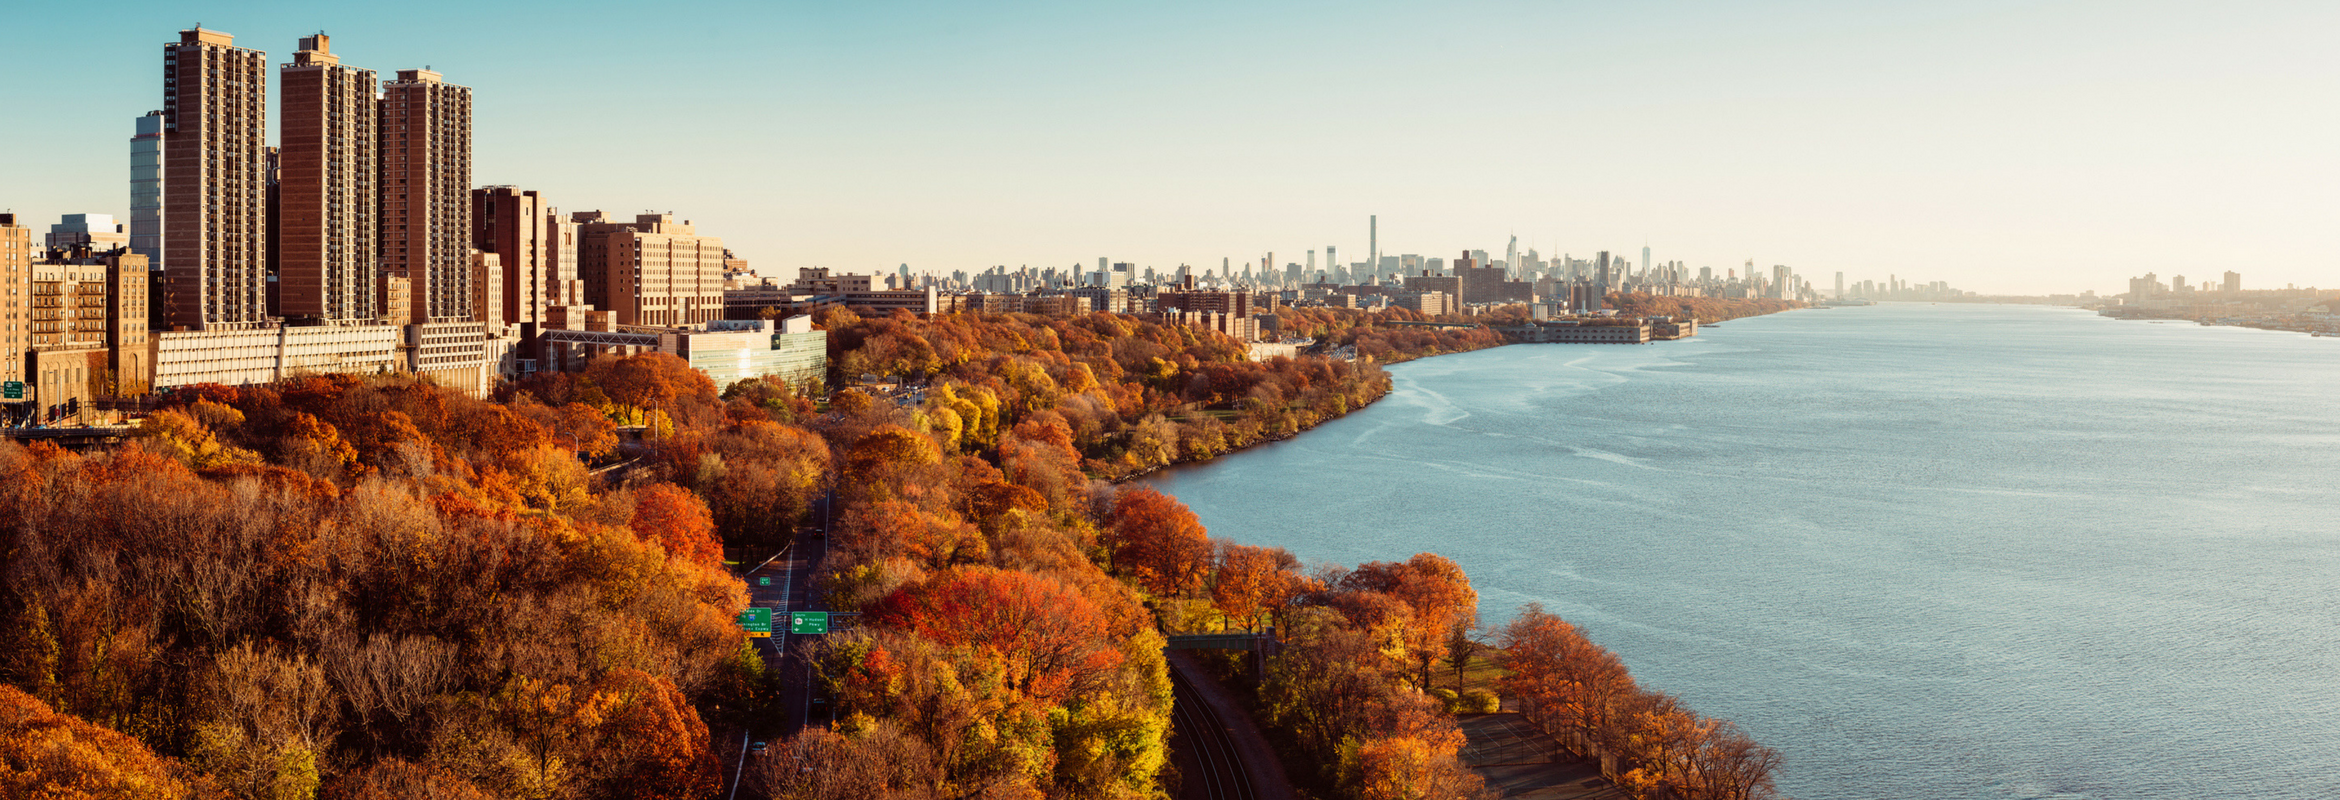 An image of a city against fall foliage.